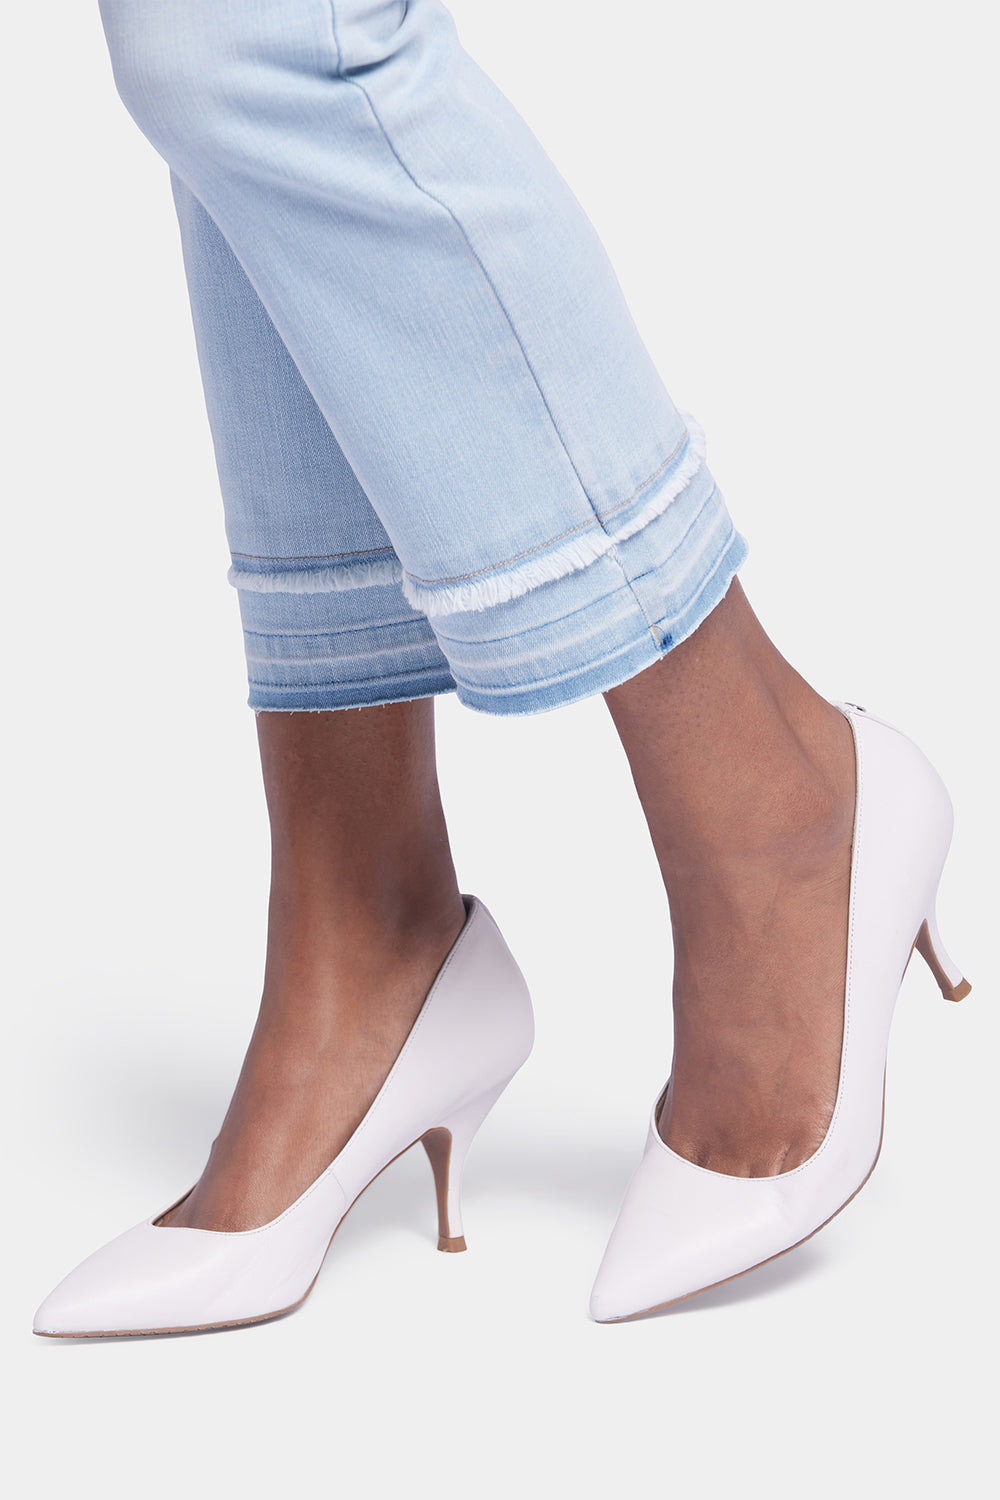 NYDJ Marilyn Straight Ankle Jeans With Attached Released Hems - Brightside